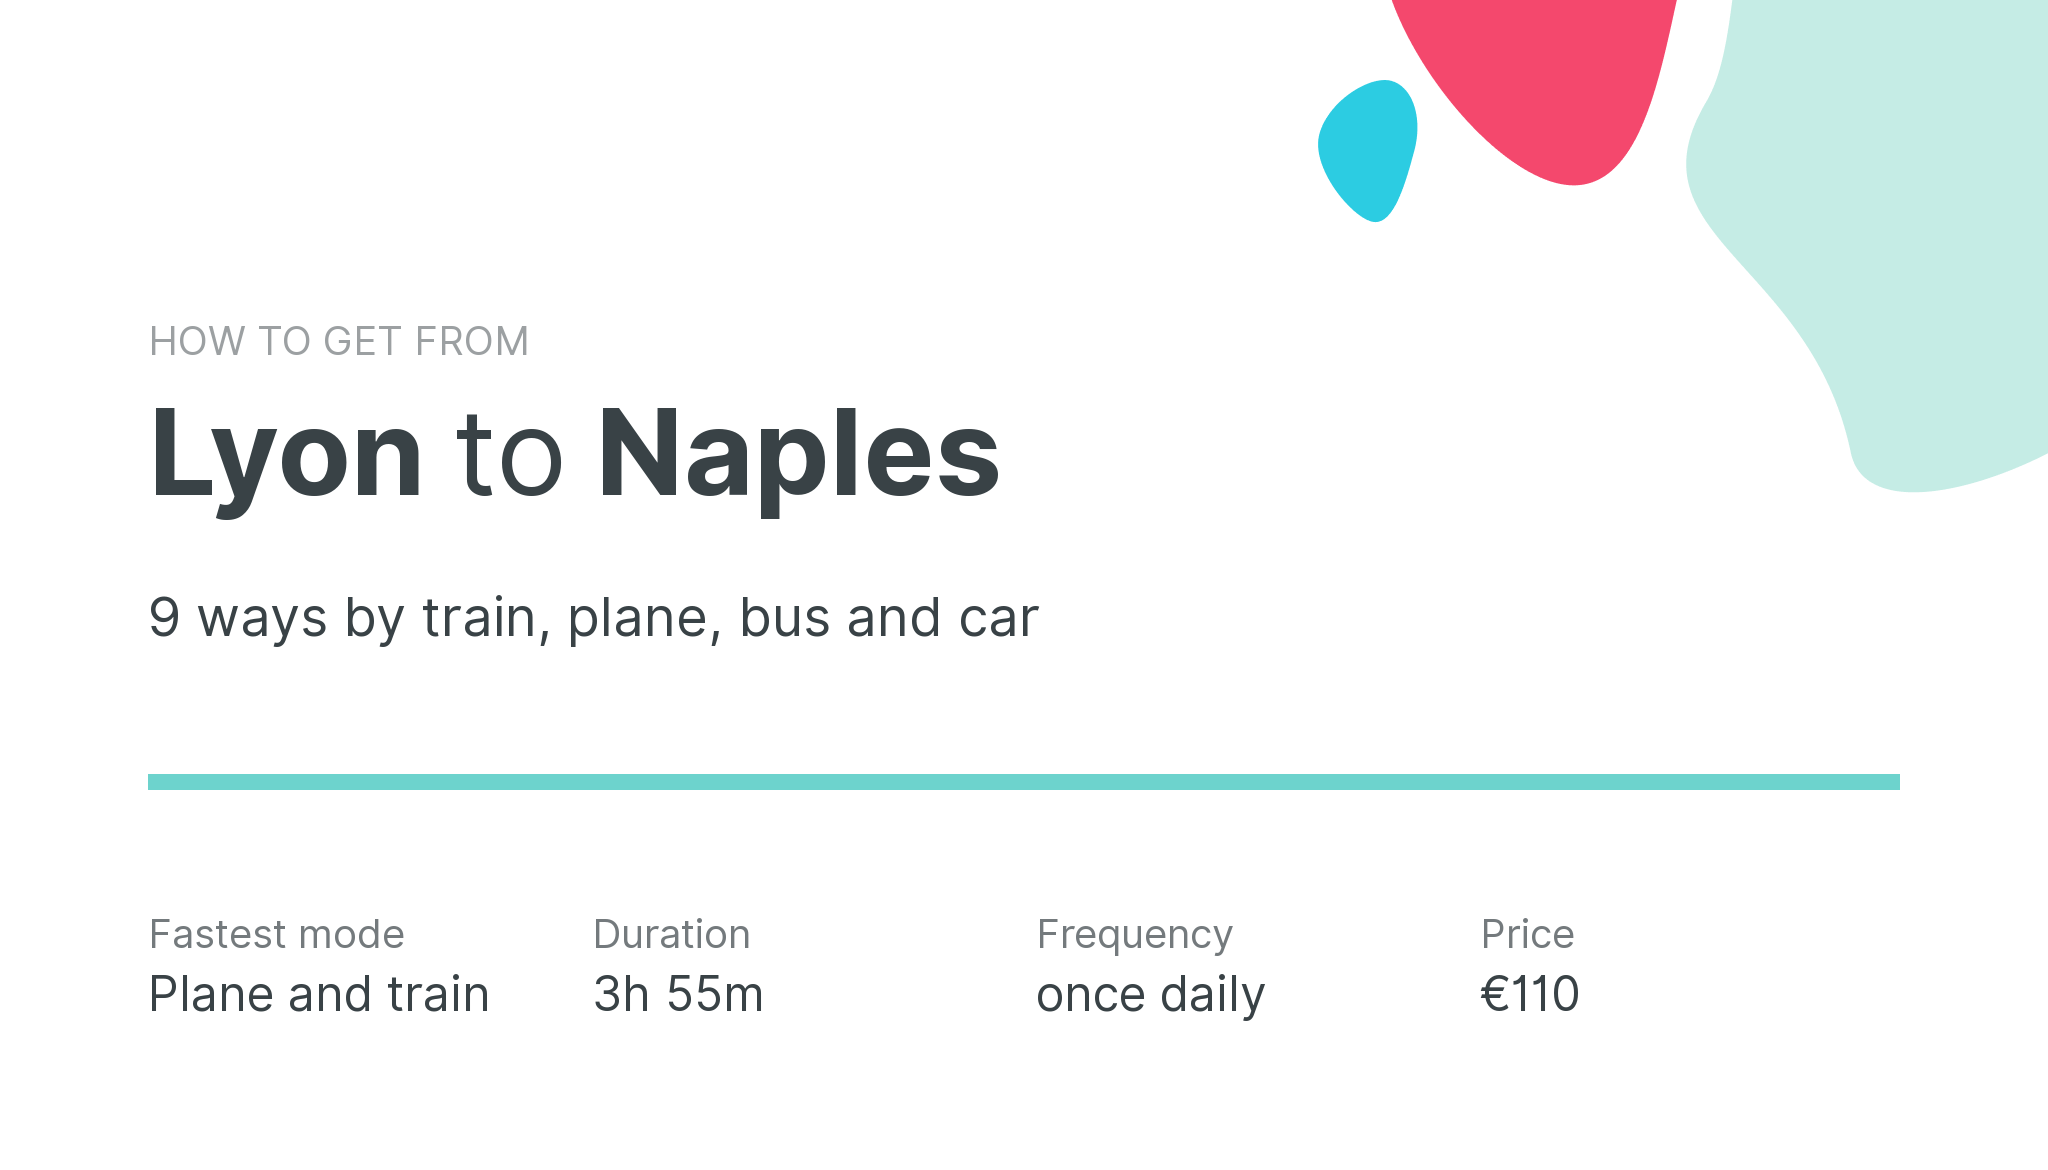 How do I get from Lyon to Naples